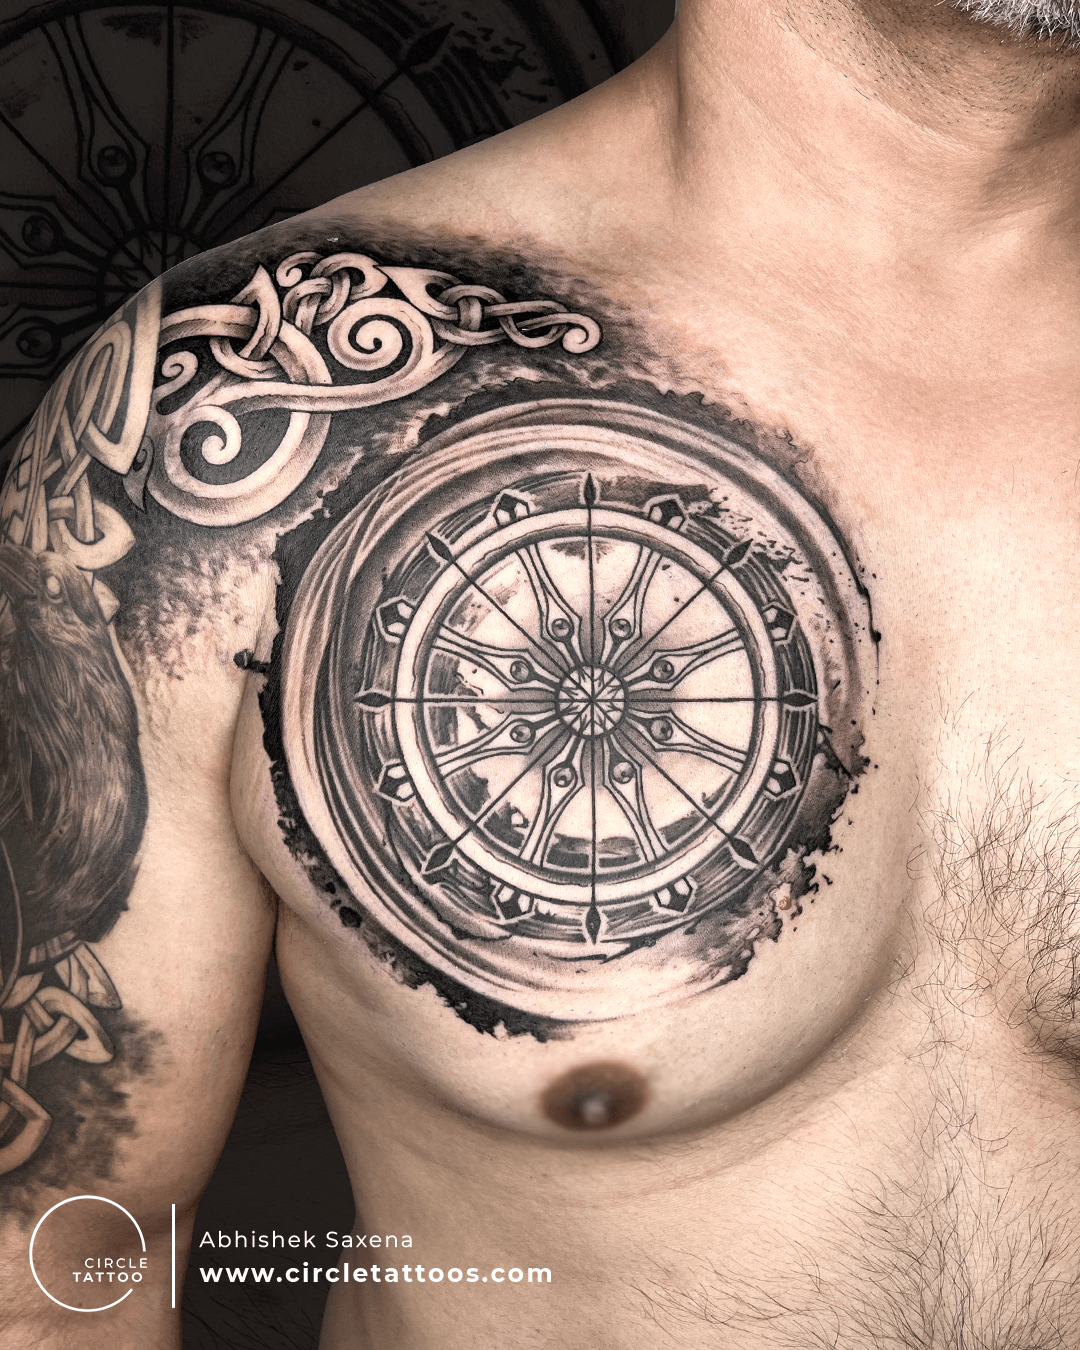 Dharma Wheel Tattoos Symbolism Meaning and More